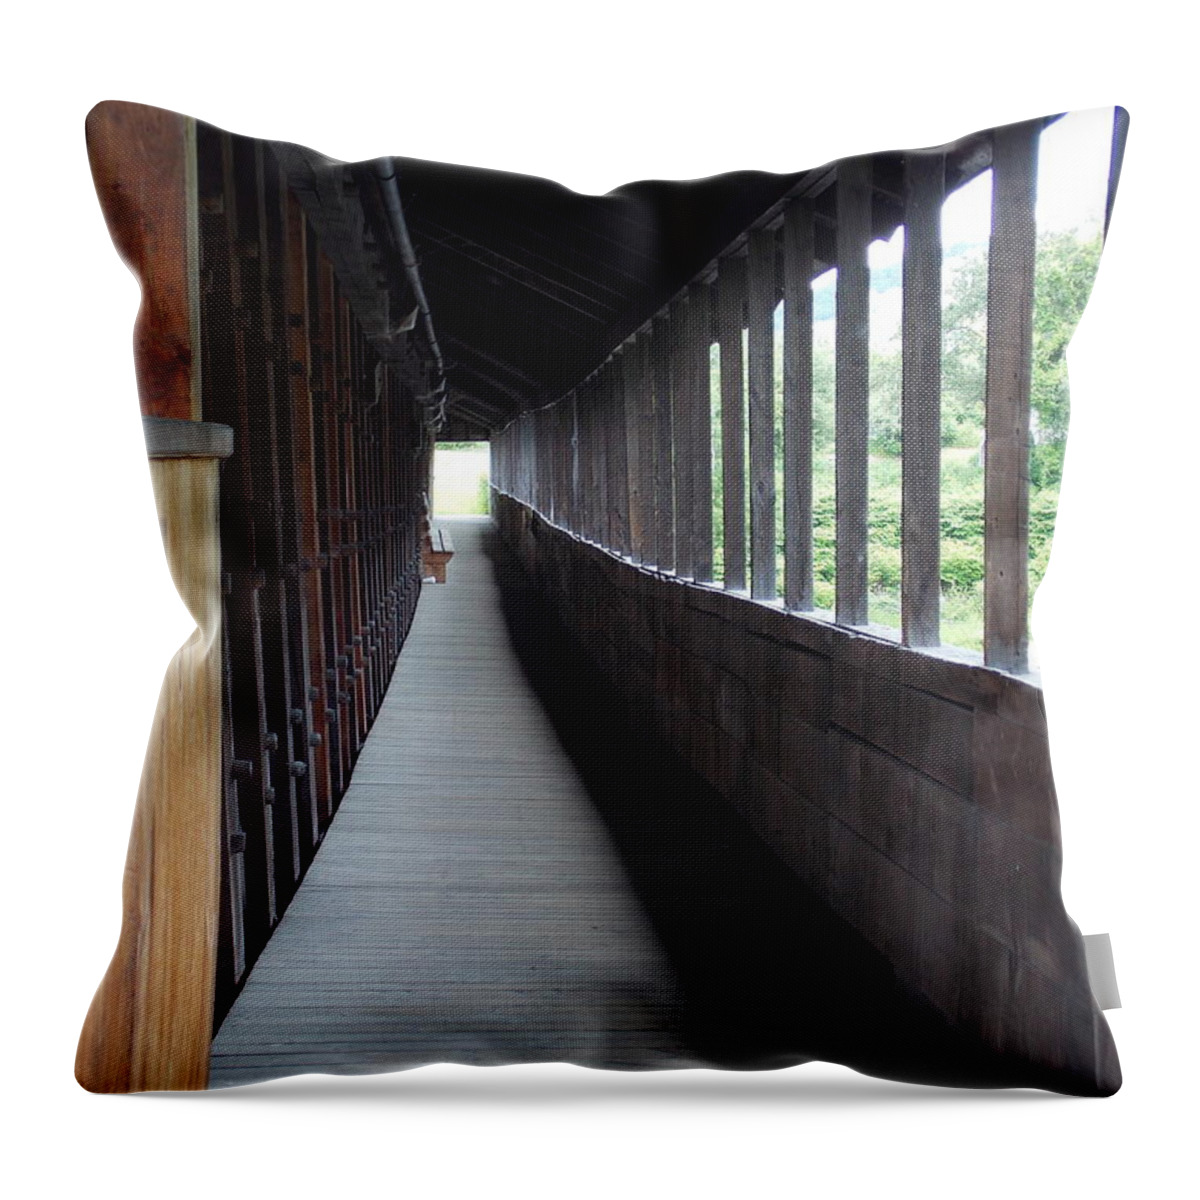 Covered Bridge Throw Pillow featuring the photograph Long walkway in Covered Bridge by Catherine Gagne